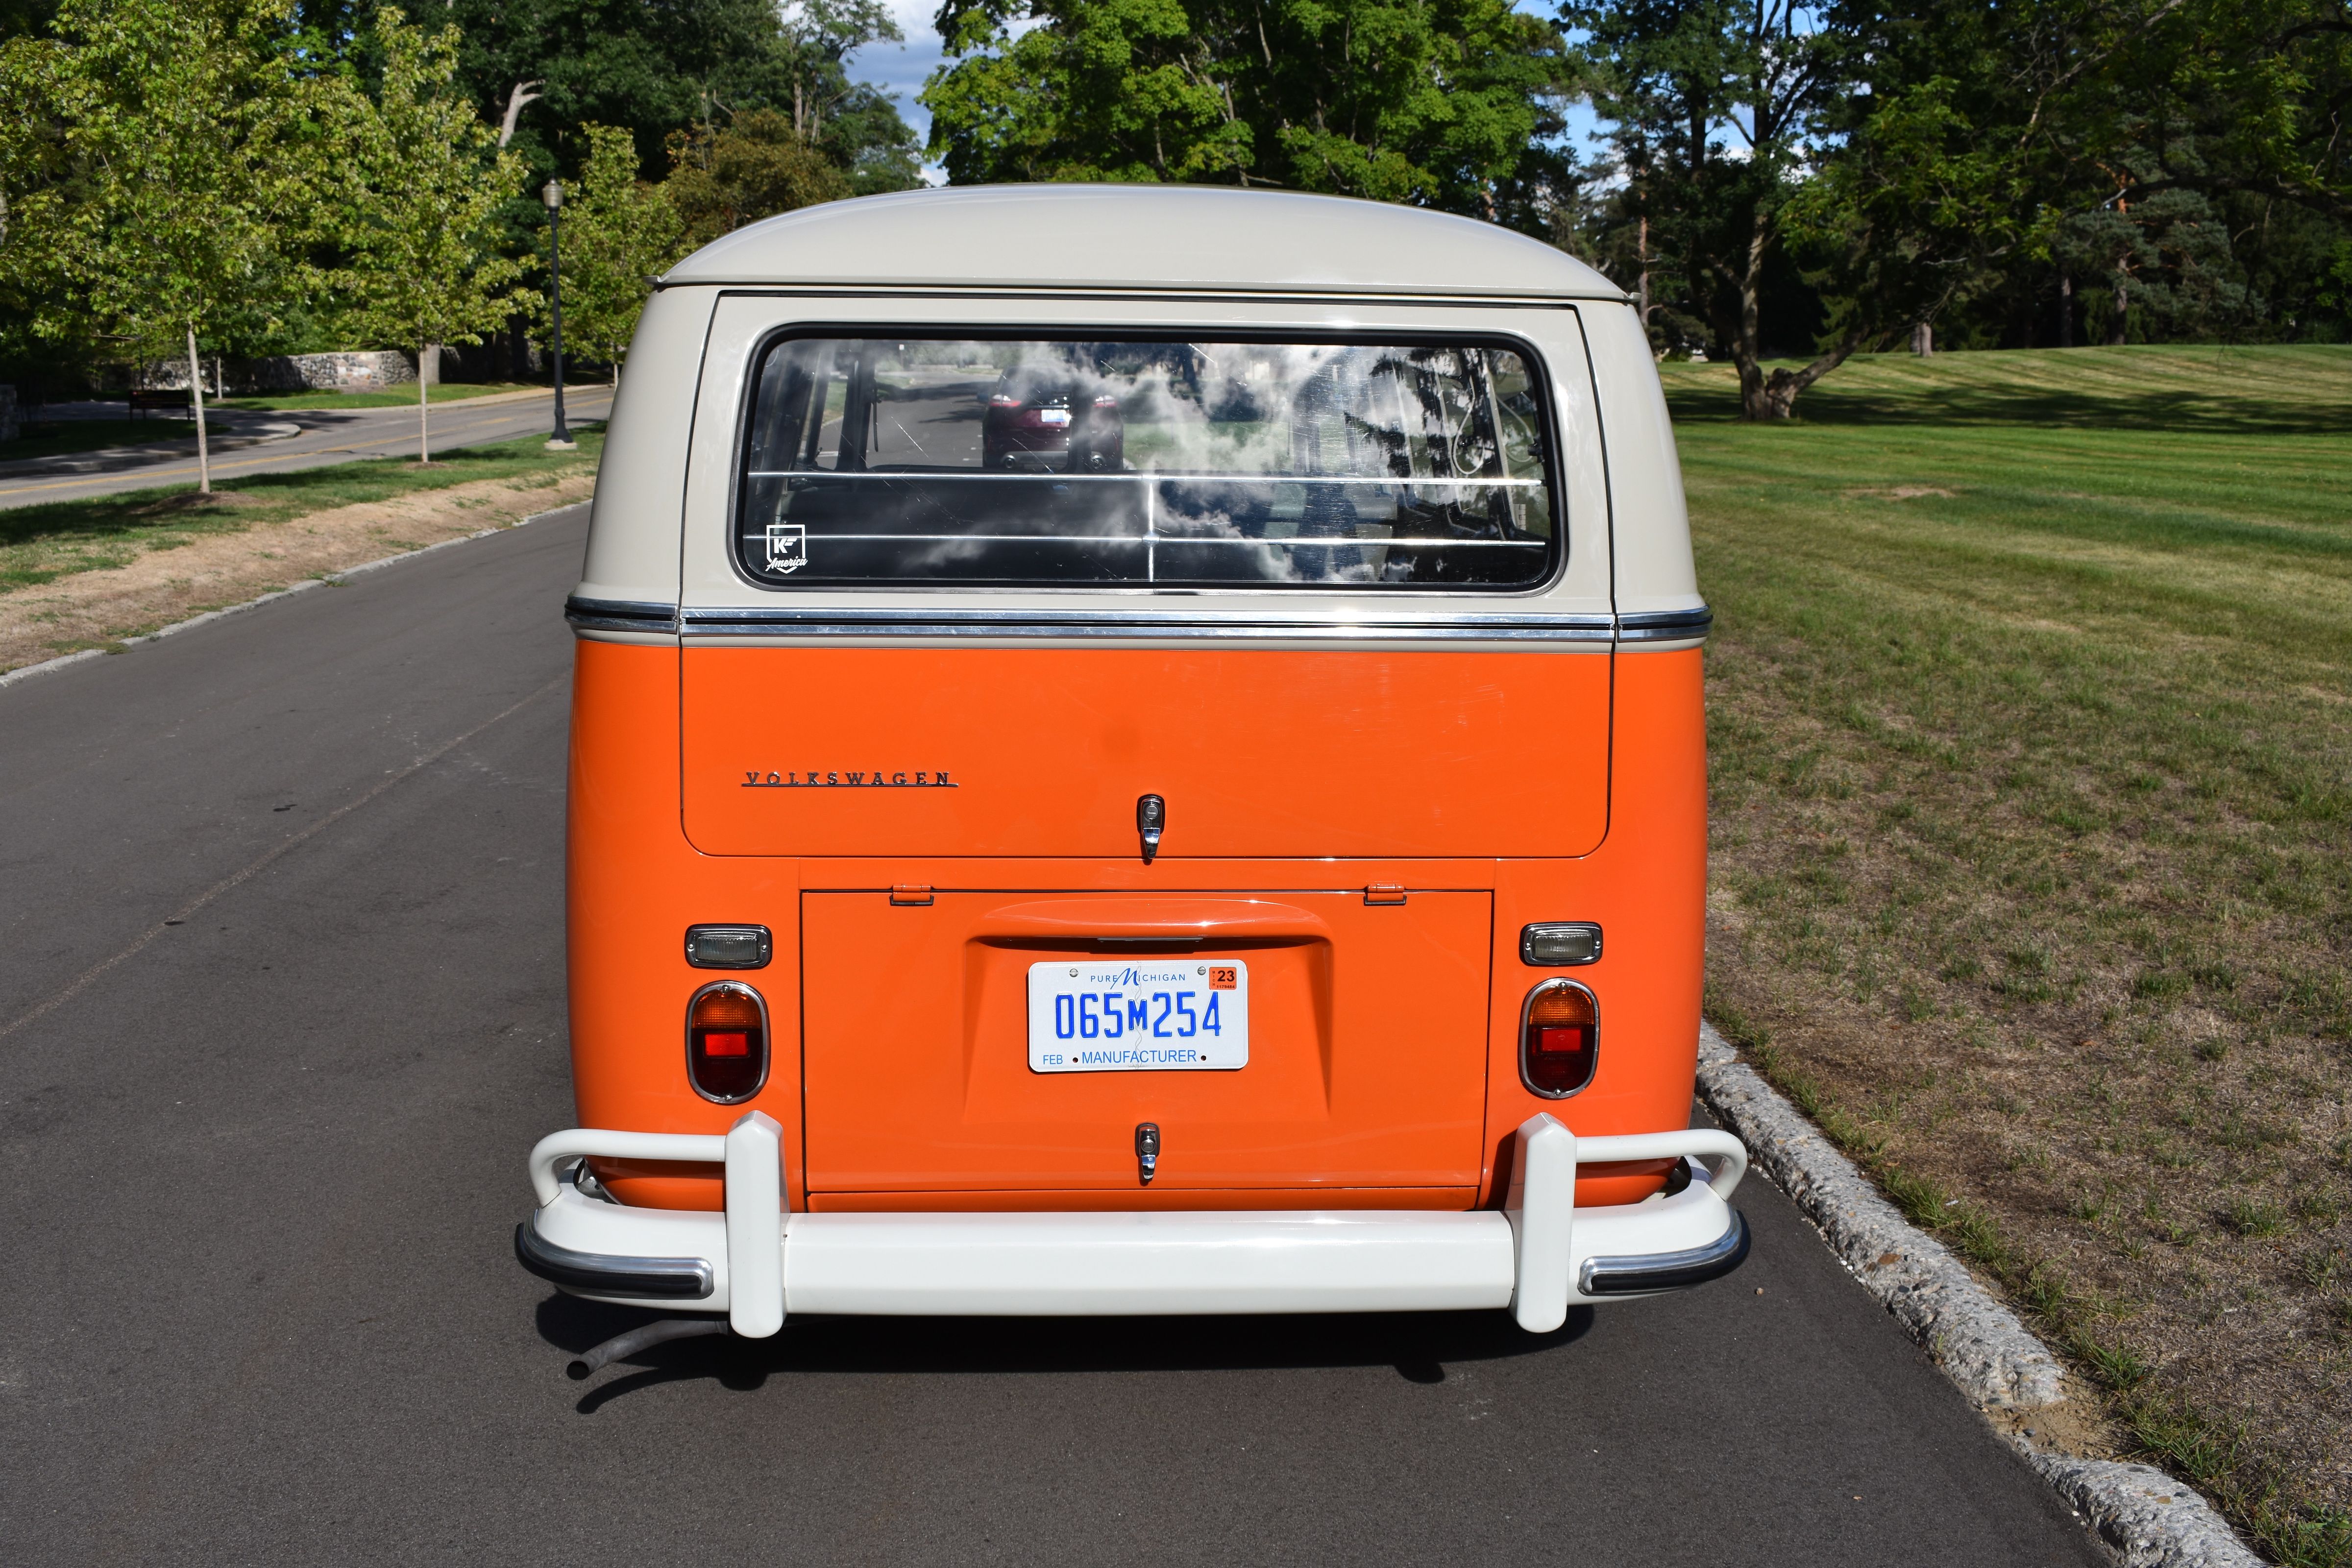 halv otte laser daytime 5 Things to Know About Driving an Old Volkswagen Bus